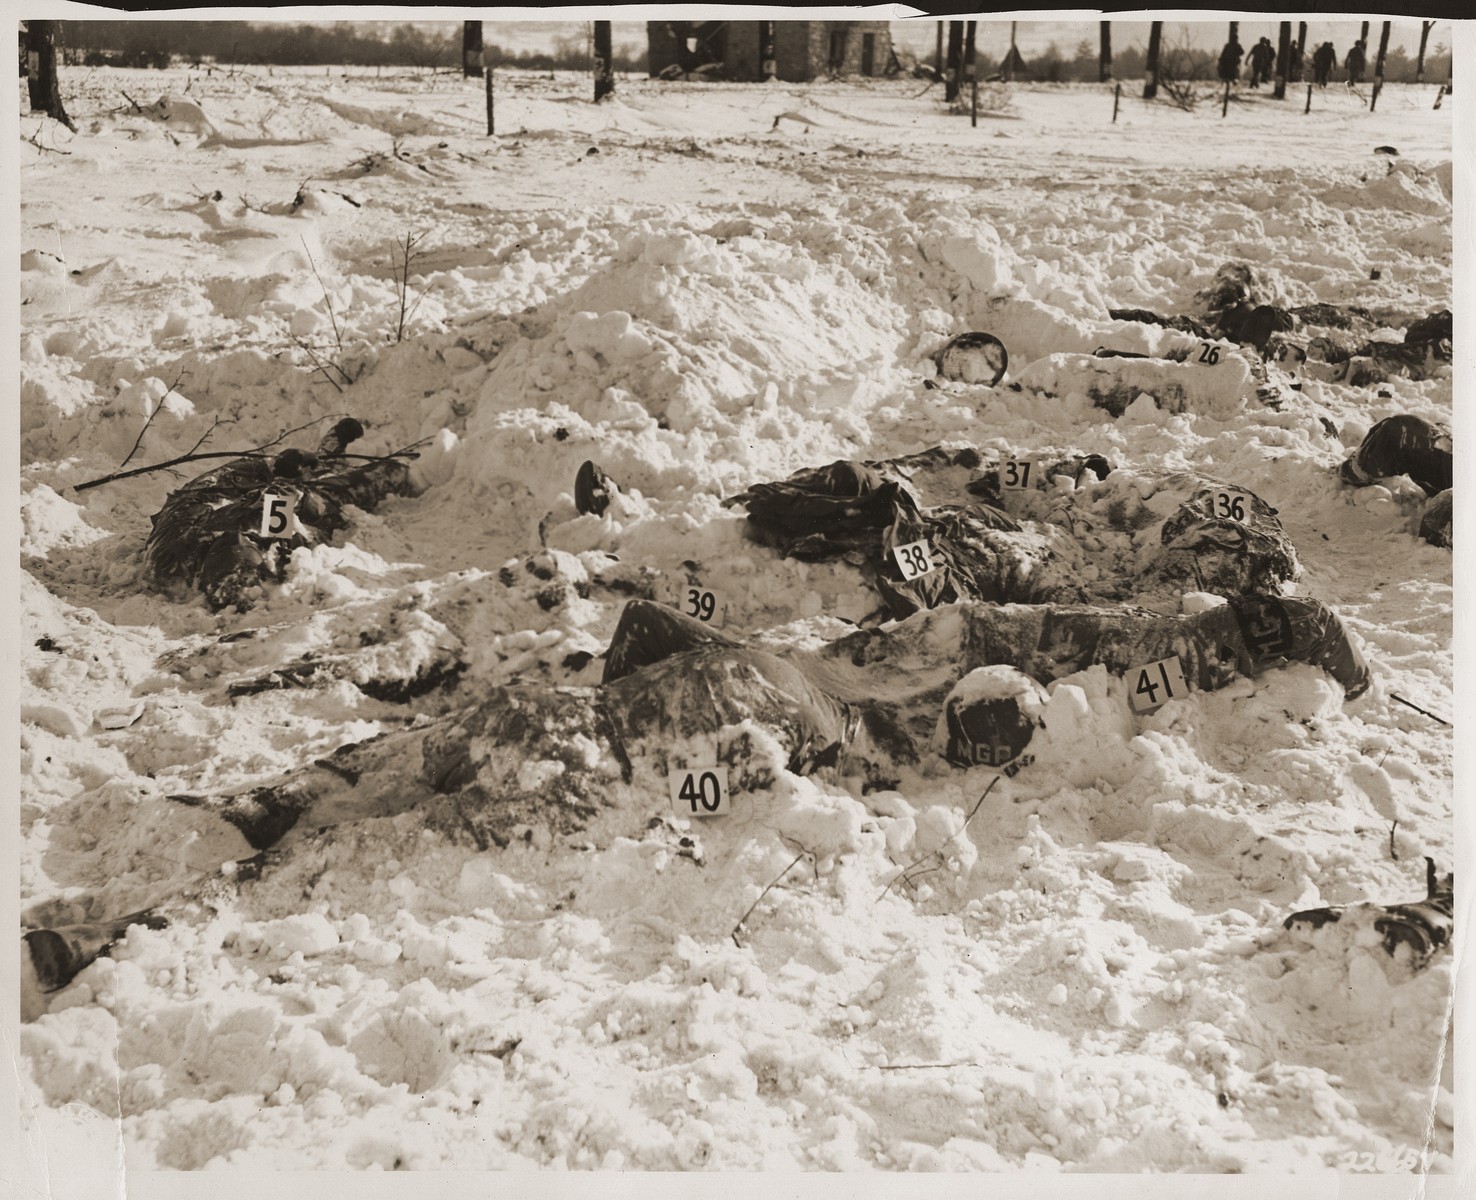 The corpses of American soldiers killed by the SS in the Malmedy atrocity.

The original caption reads "Bodies of American soldiers lie scattered here on the snowy terrain near Malmedy, Belgium, the victimns of German atoricities, committed on or about 17 December 1944."